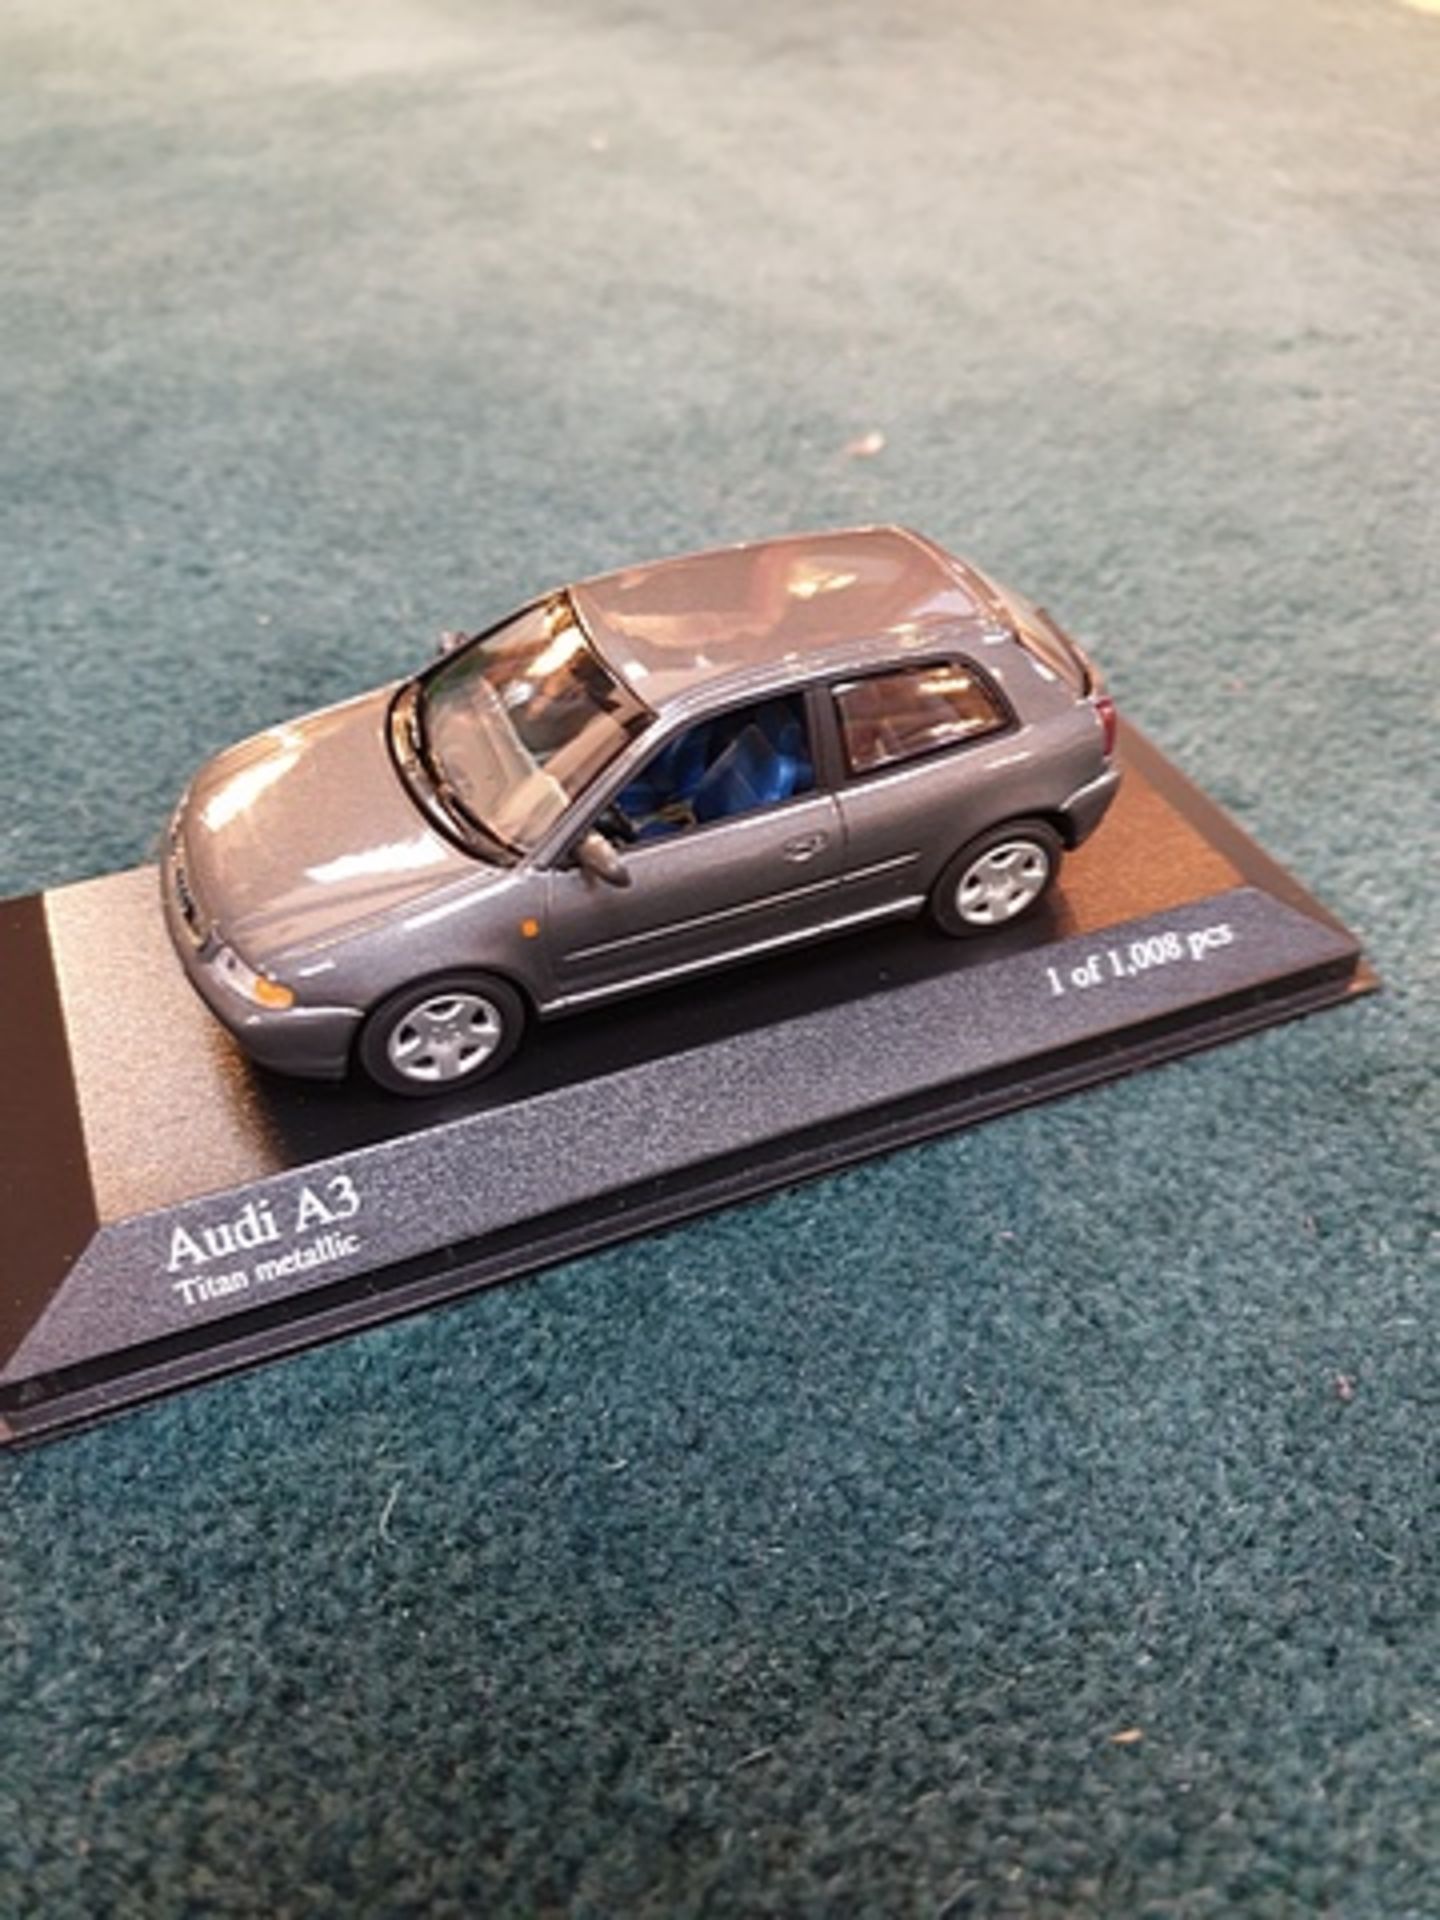 Minichamps Scale 1/43 Model 430 015105 Audi A3 1996 Grey Metallic Complete With Box - Image 2 of 2